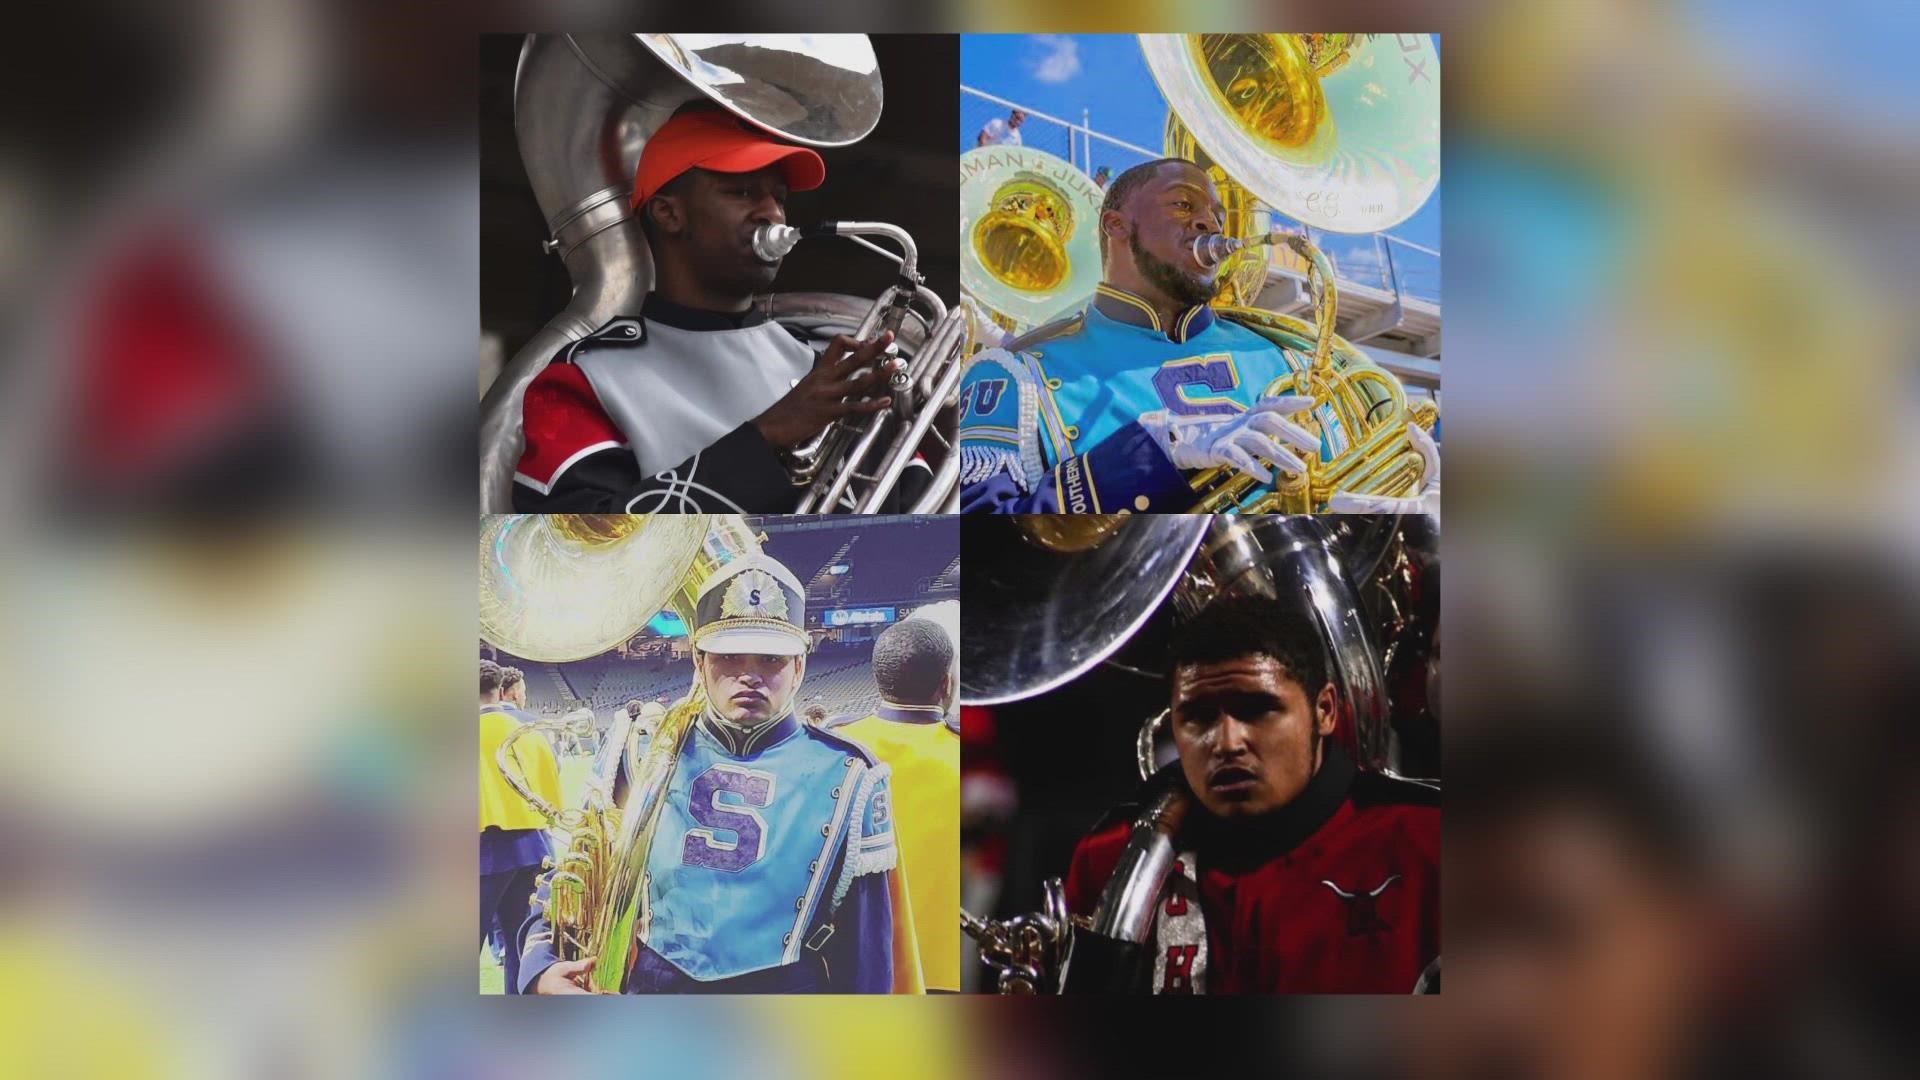 On Tuesday night, three band members of Southern University's Human Jukebox Marching Band were killed in a crash involving an 18-wheeler in Northern Louisiana.